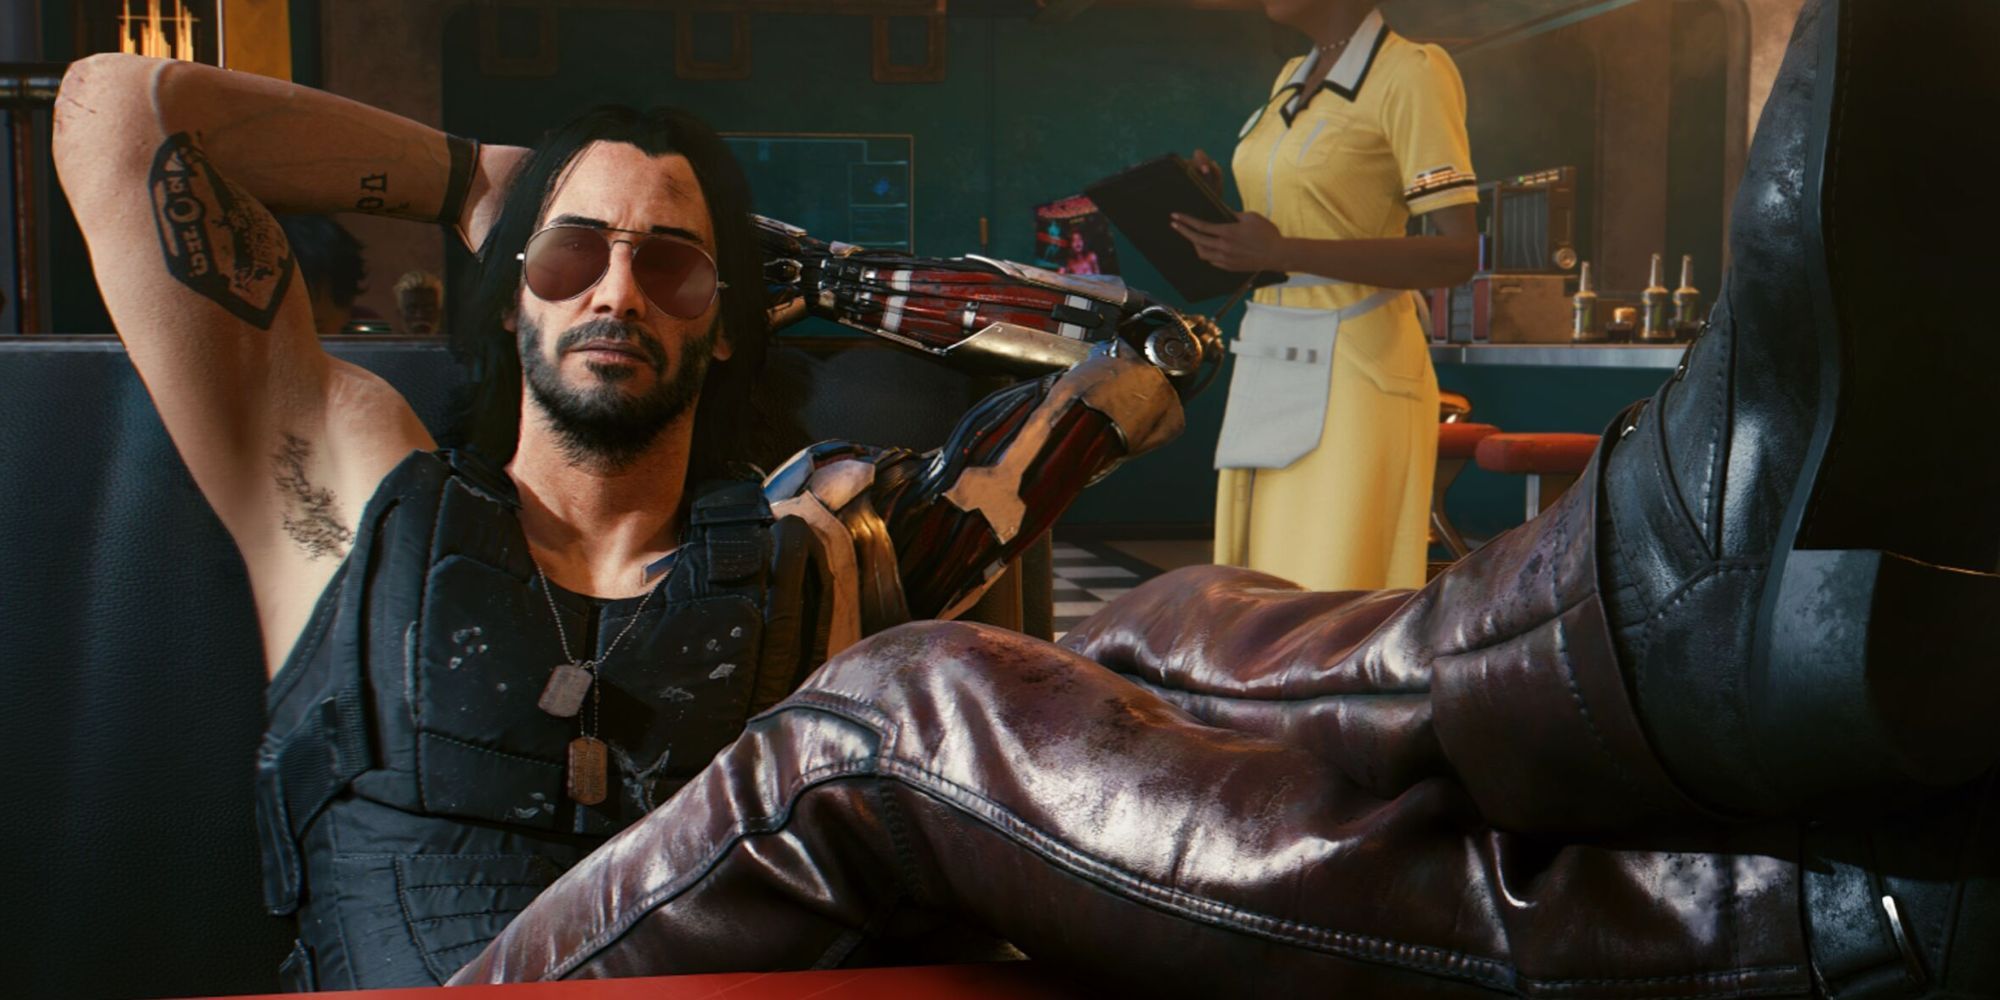 Keanu Reeves sitting with feet propped up in Cyberpunk 2077